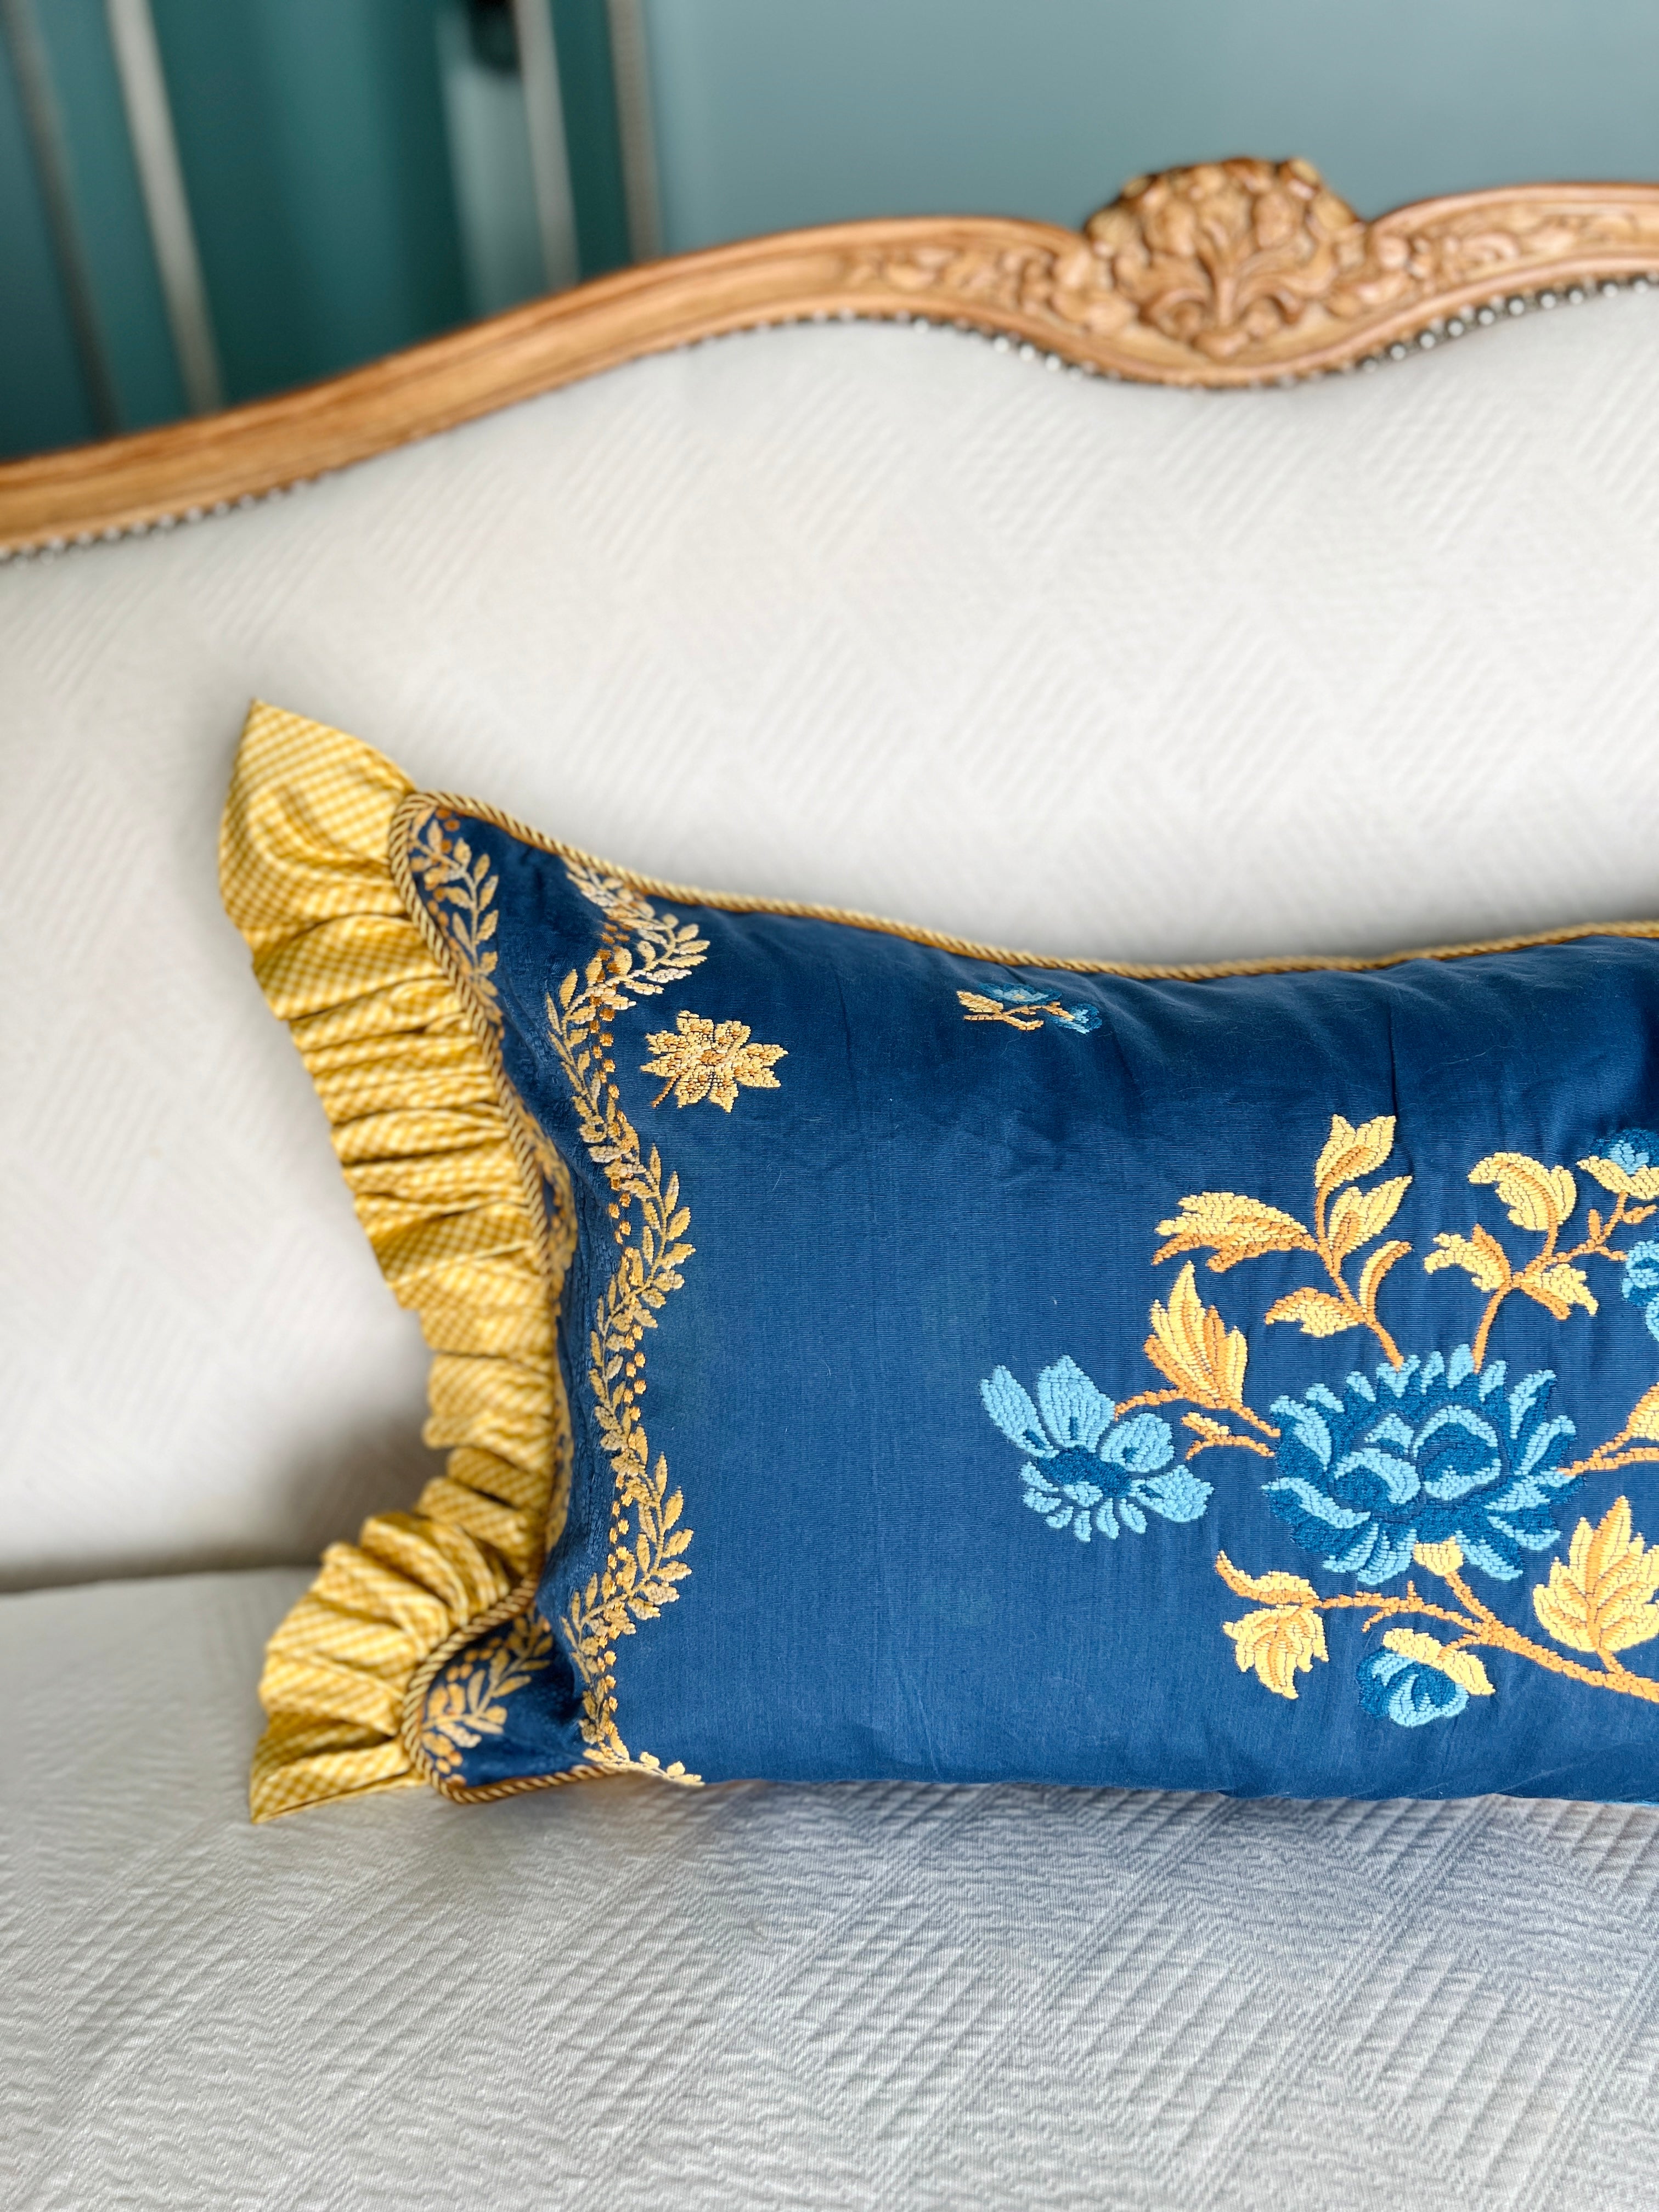 Blue and yellow embroidered pillow cover with silk ruffle trim